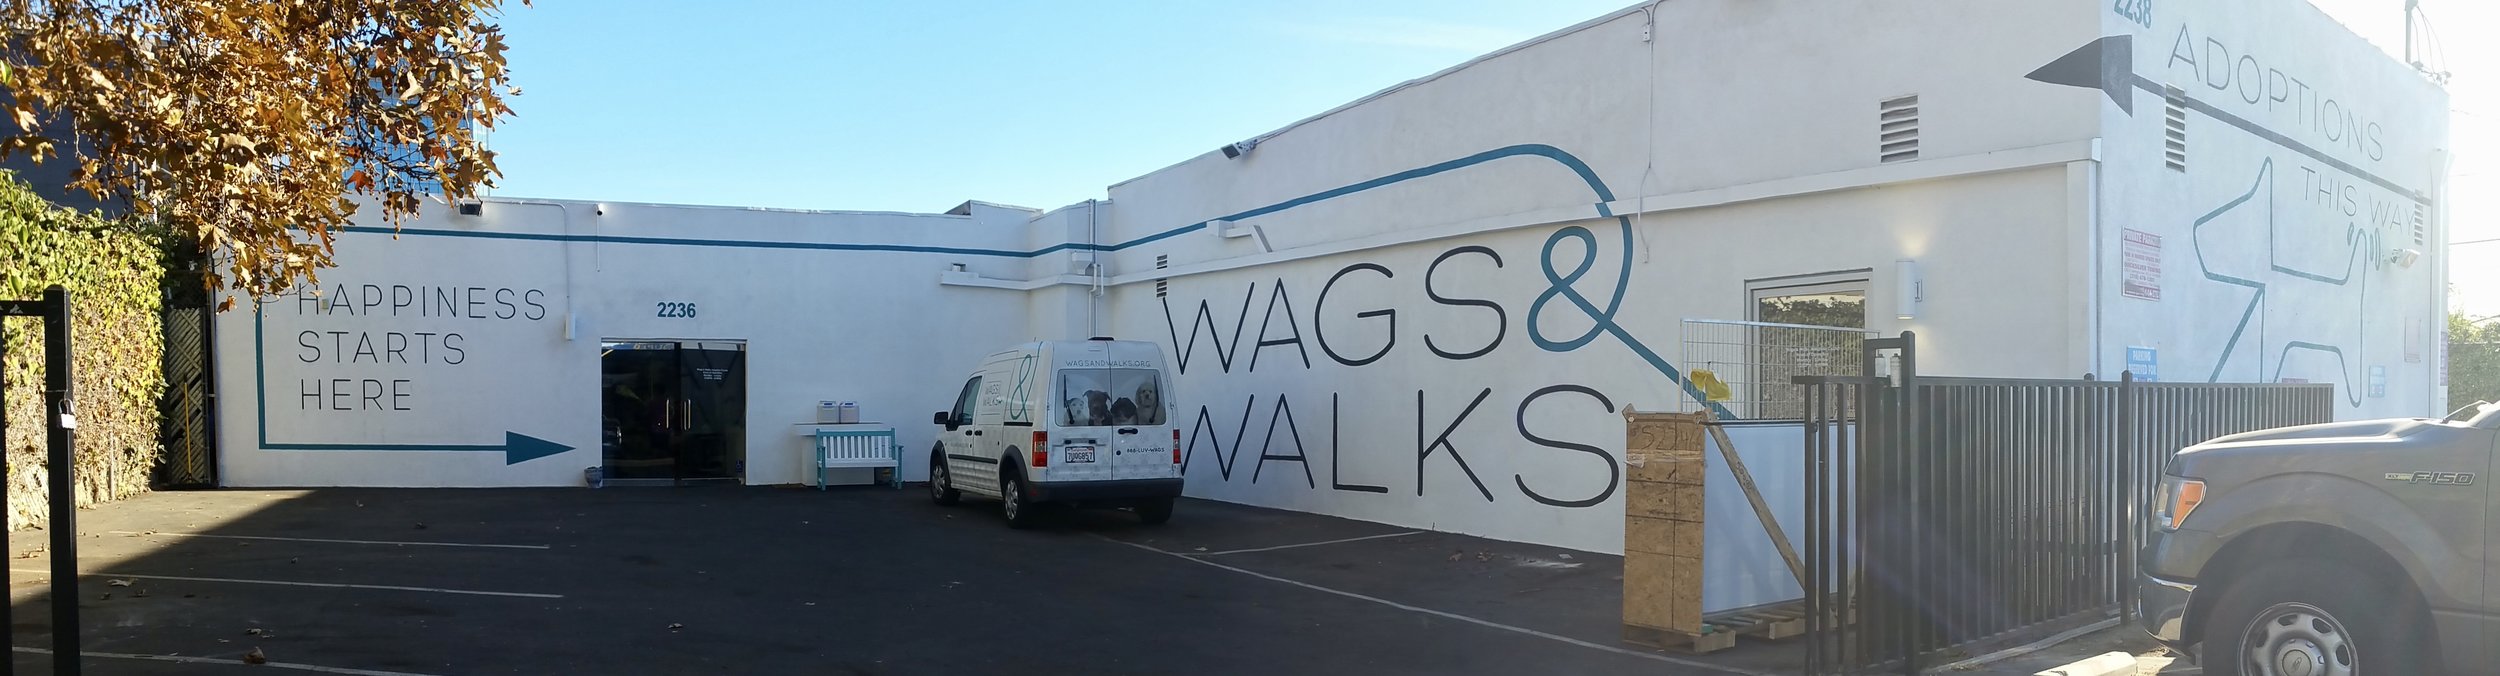 Wags &amp; Walks hand painted graphic mural